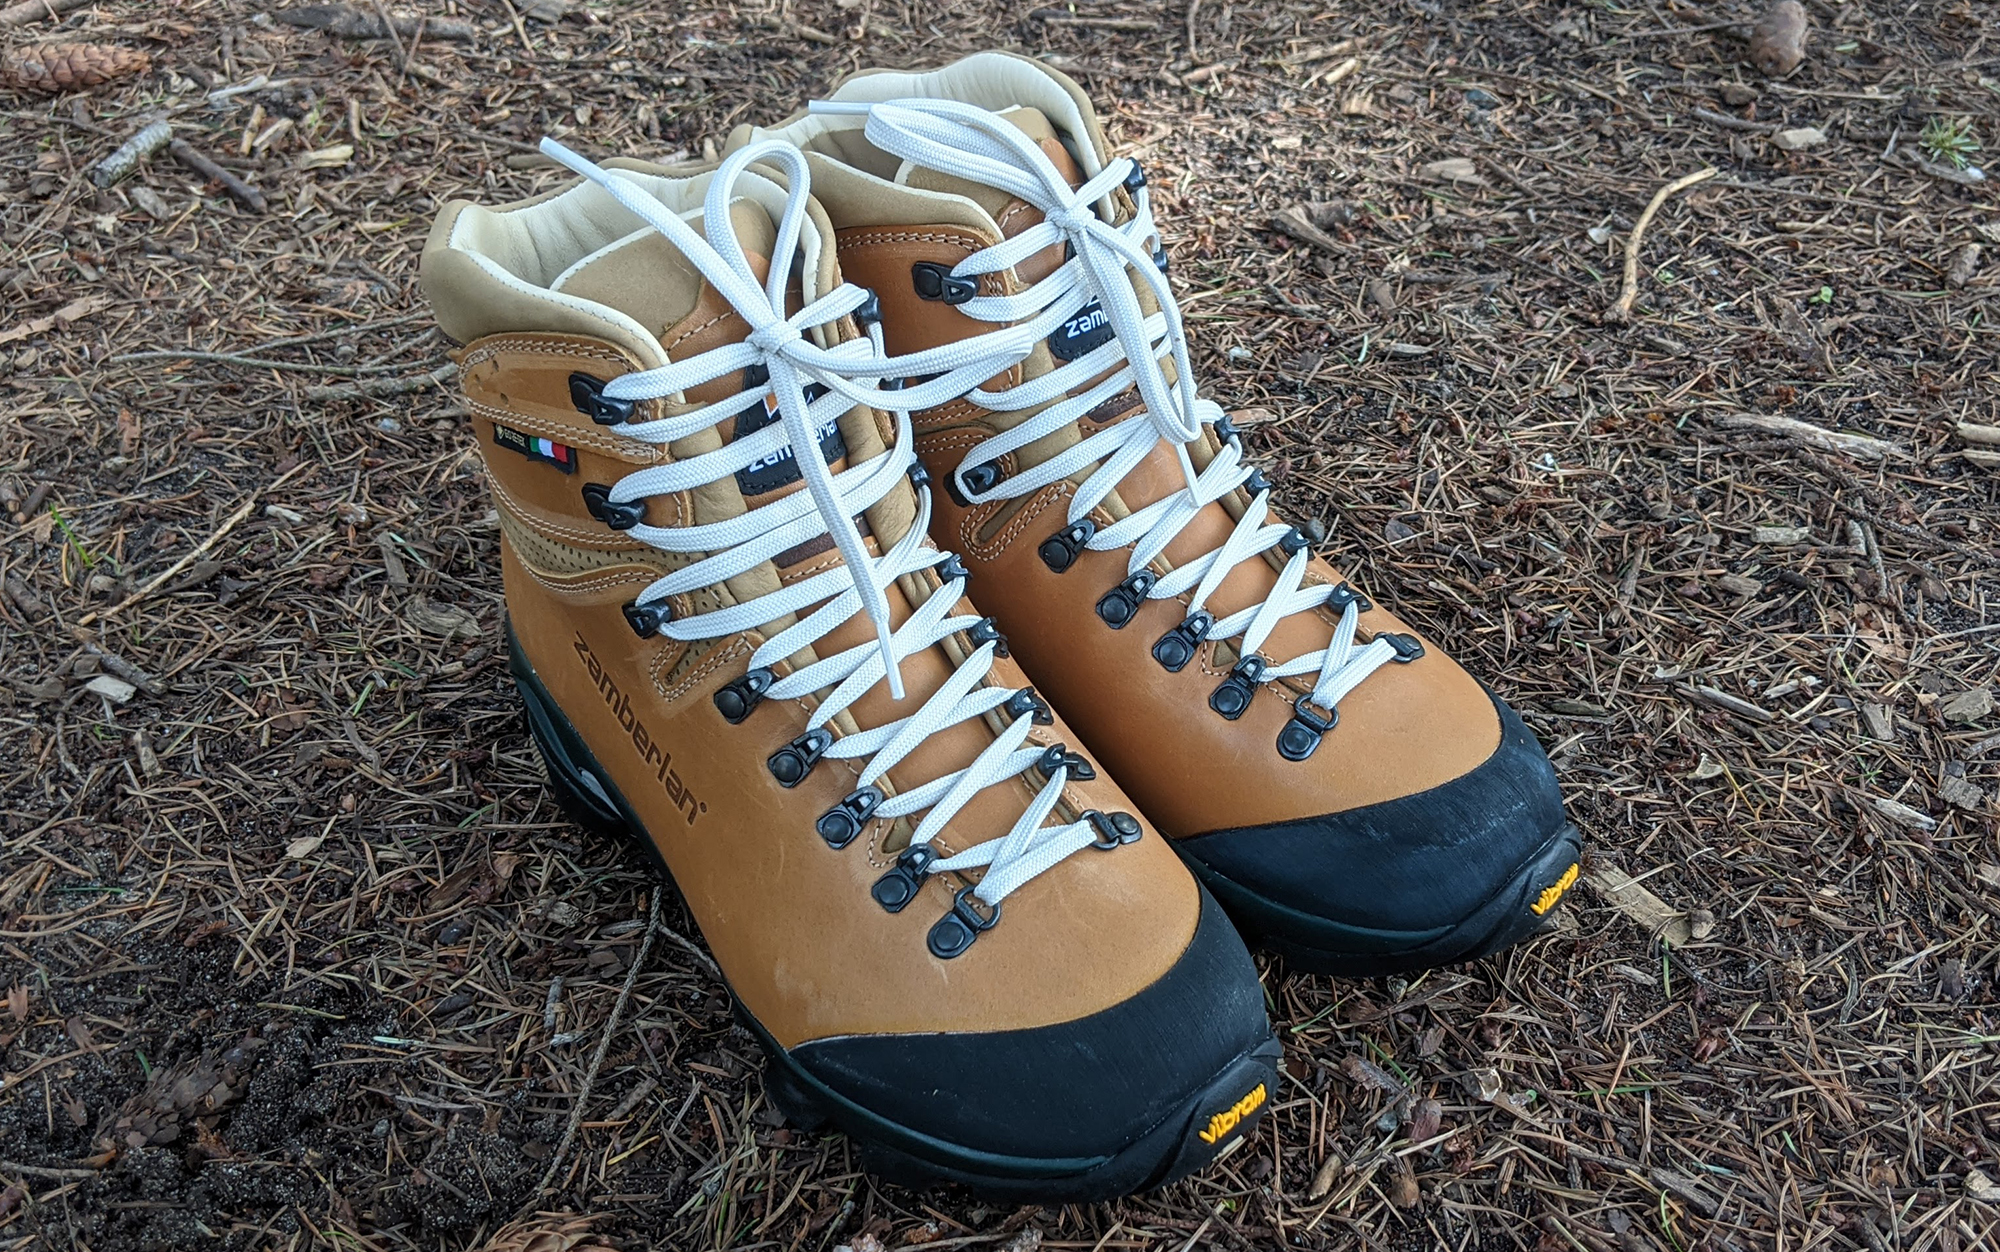 The Zamberlan 1996 Vioz is one of the best waterproof hiking boots.